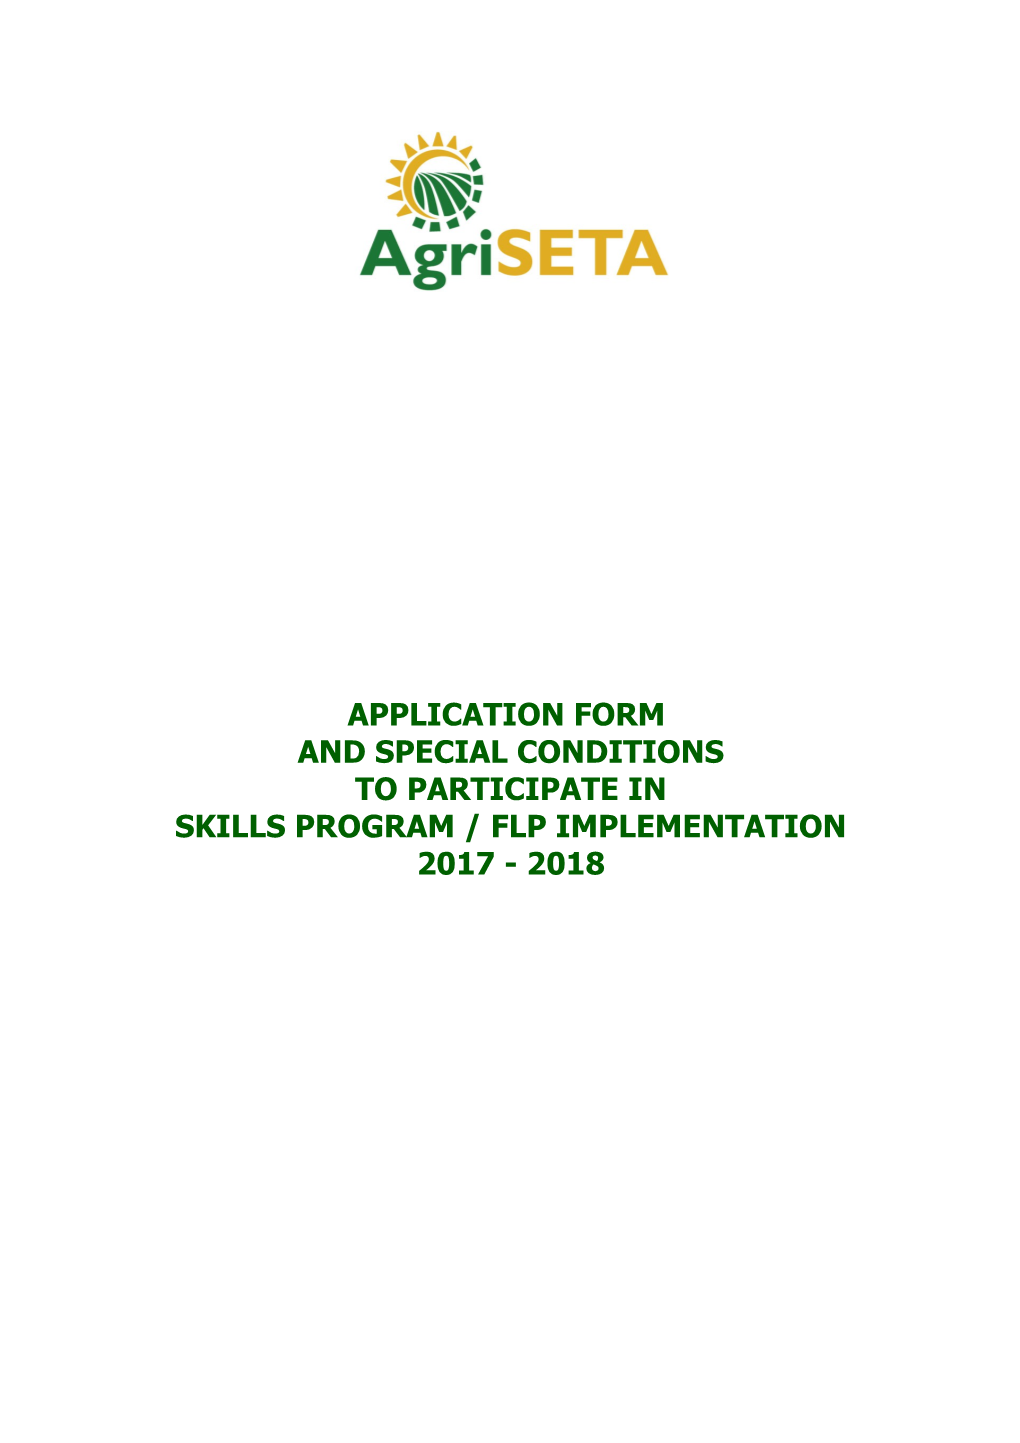 Record Joint Implementation Plan Between Agriseta and ______